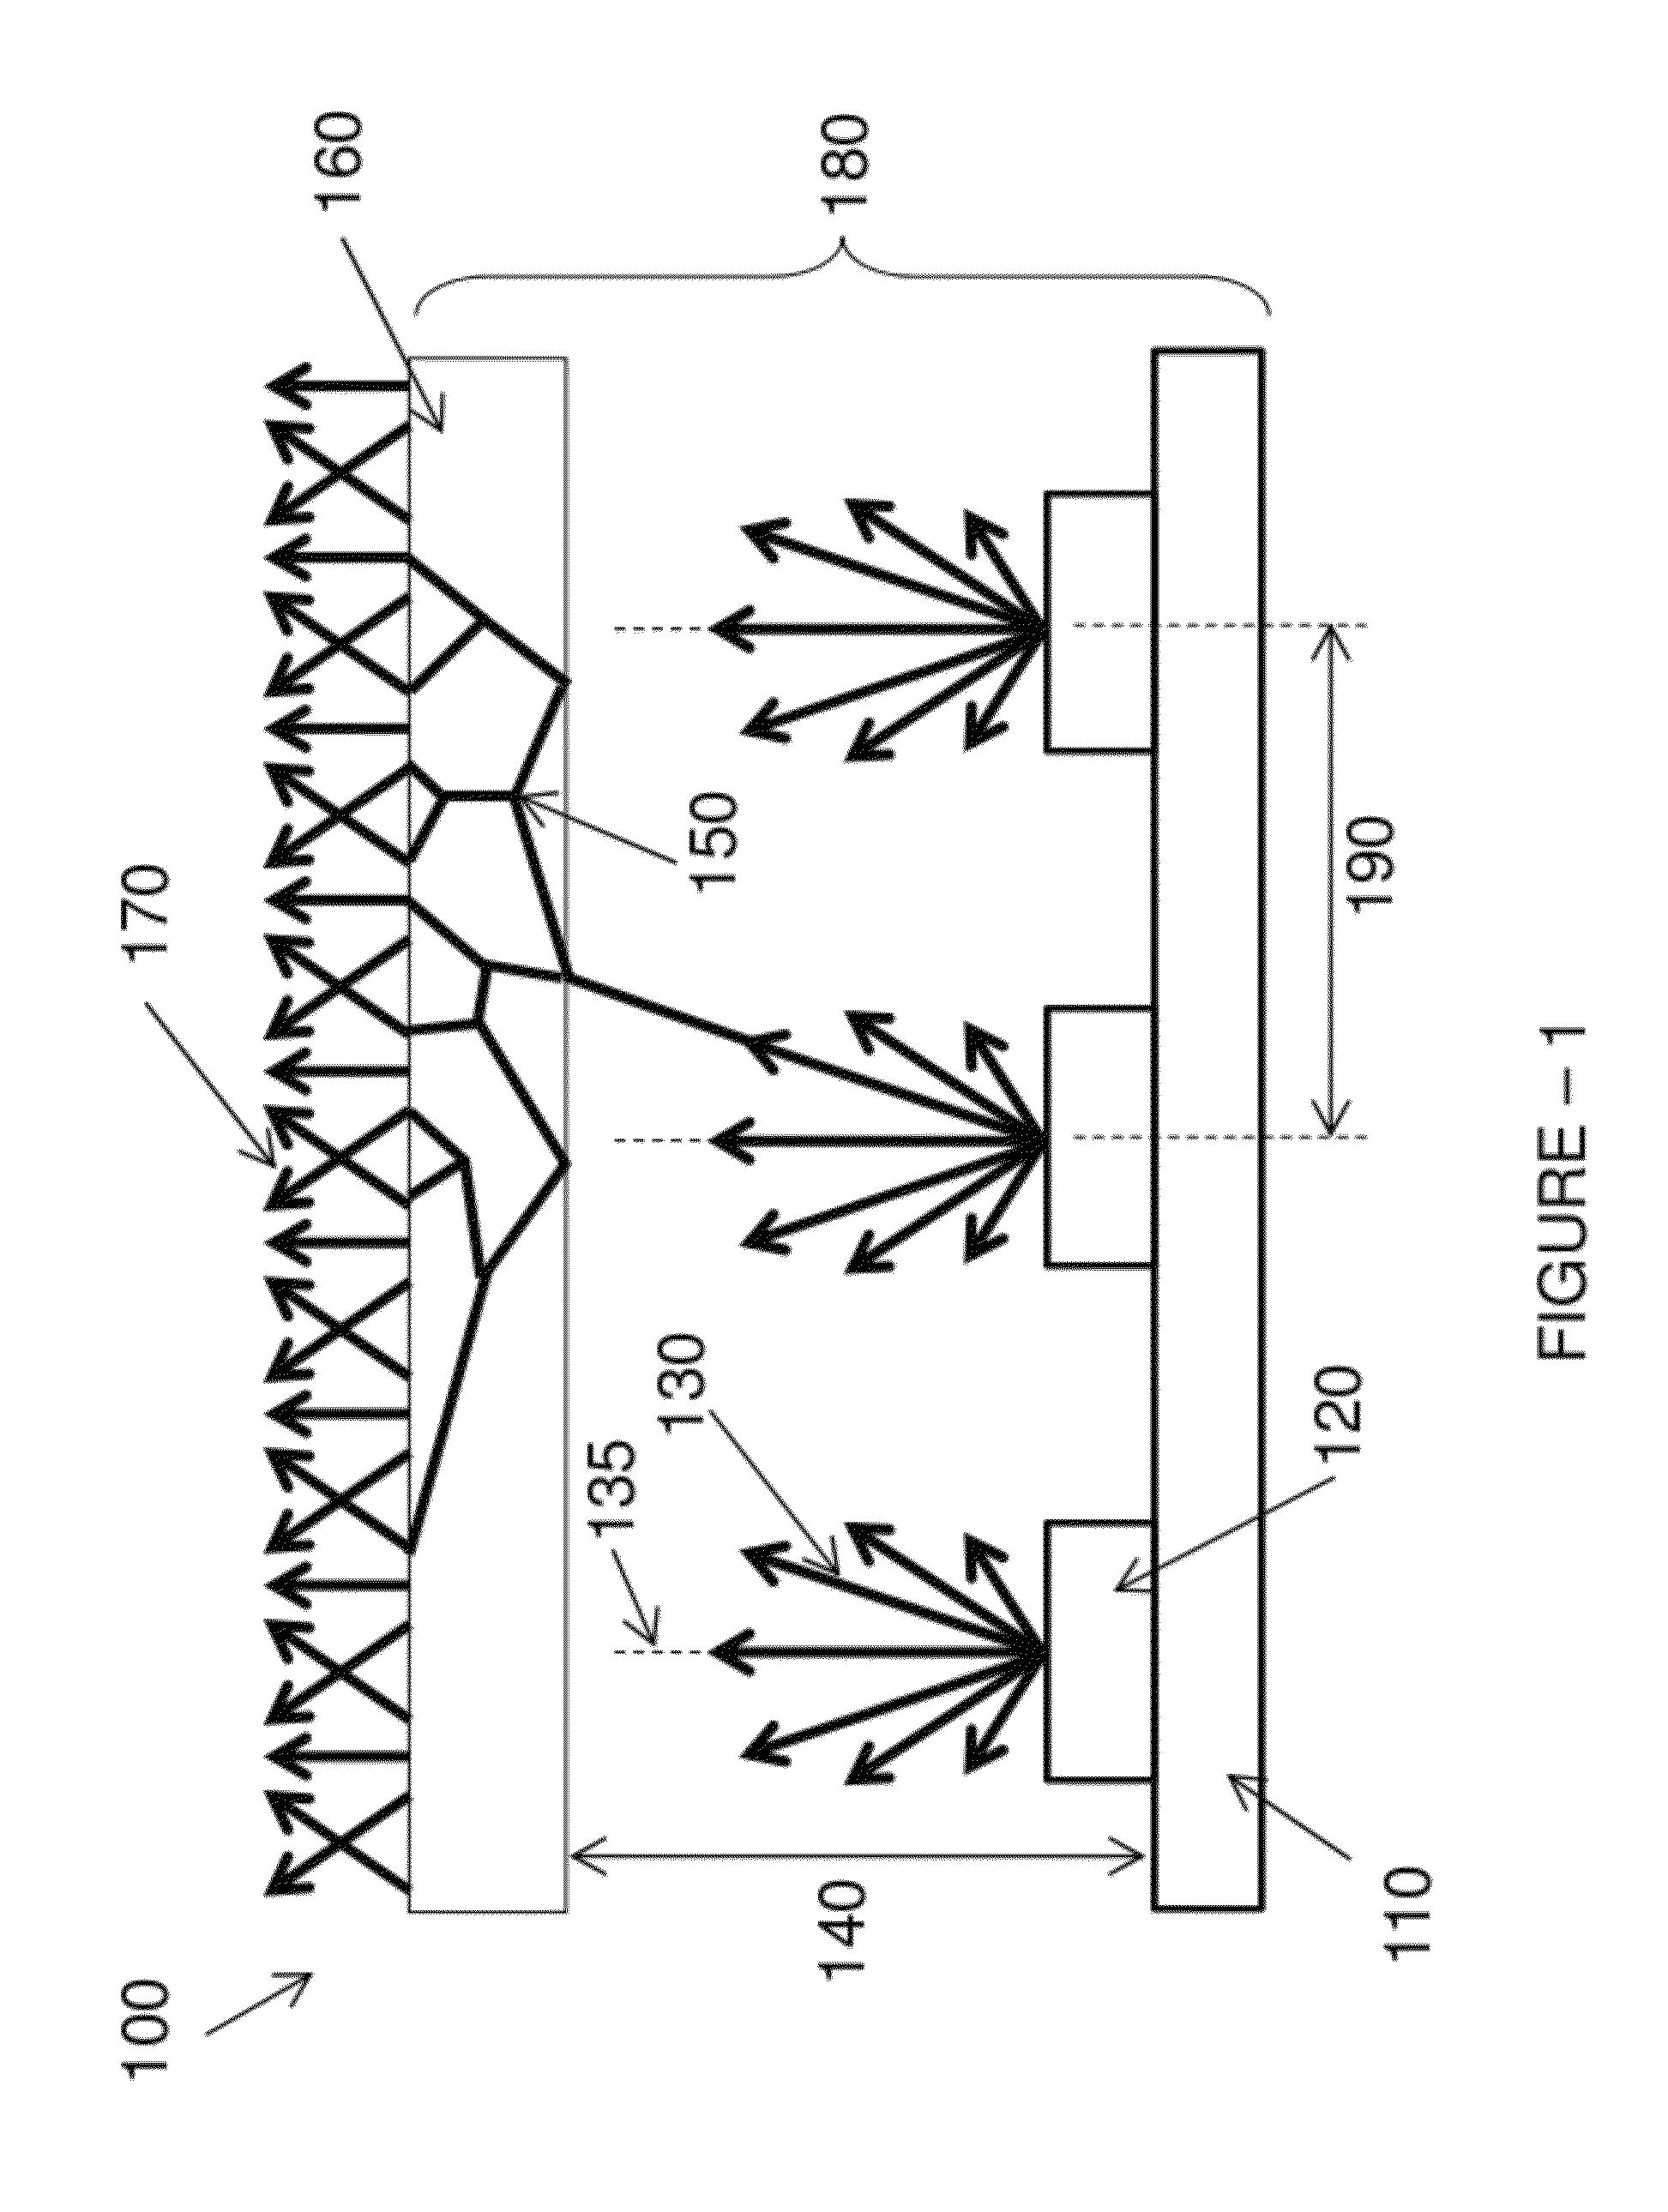 Shaped Reflectors for Enhanced Optical Diffusion in Backlight Assemblies